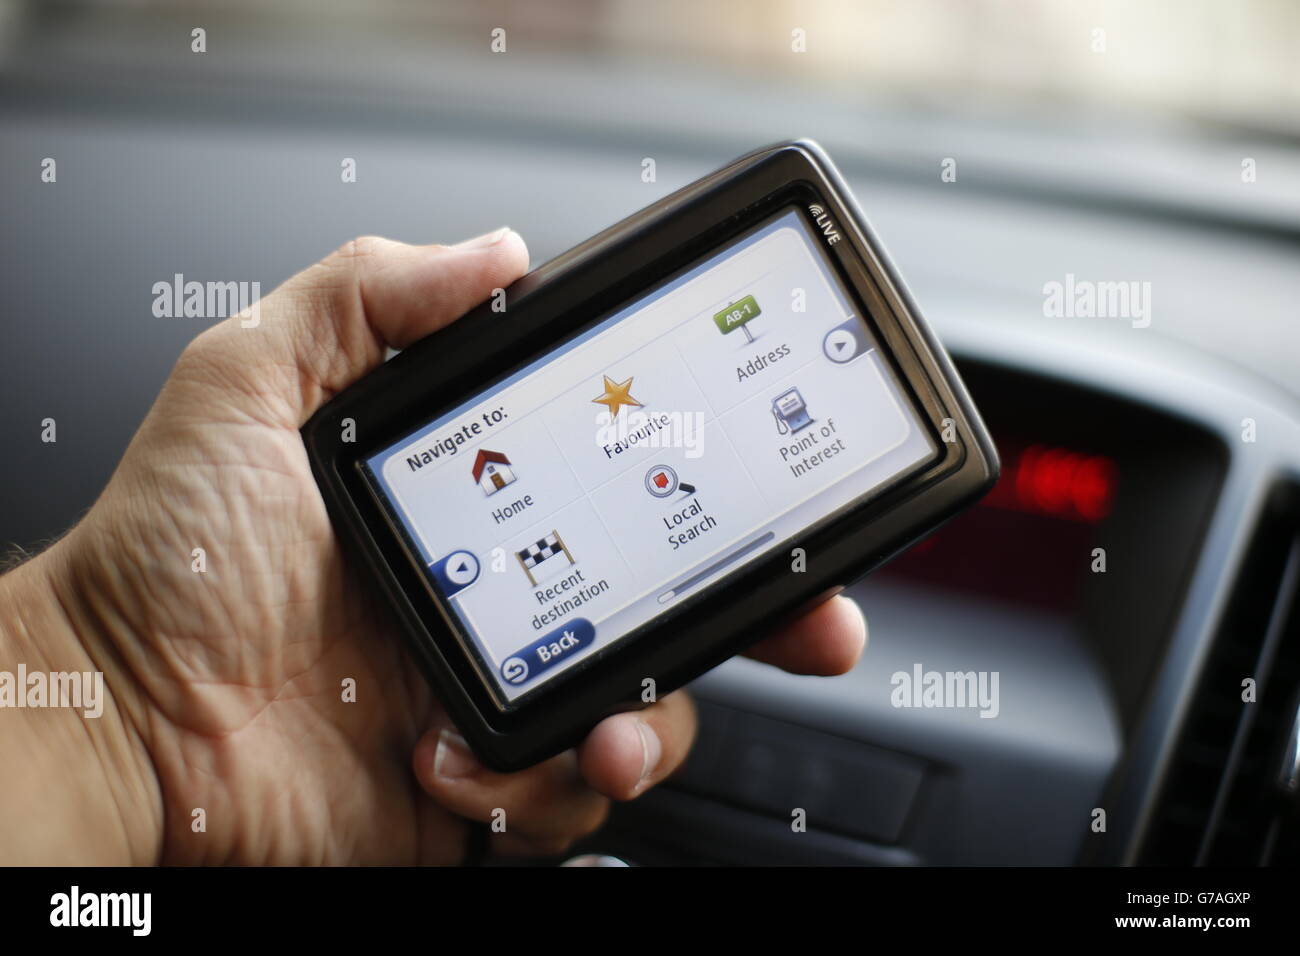 A man uses a satellite Navigator in his car. The sat nav system s a system of satellites that provide autonomous geo-spatial positioning with global coverage. It allows small electronic receivers to determine their location (longitude, latitude, and altitude ) to high precision (within a few metres) using time signals transmitted along a line of sight by radio from satellites. Stock Photo